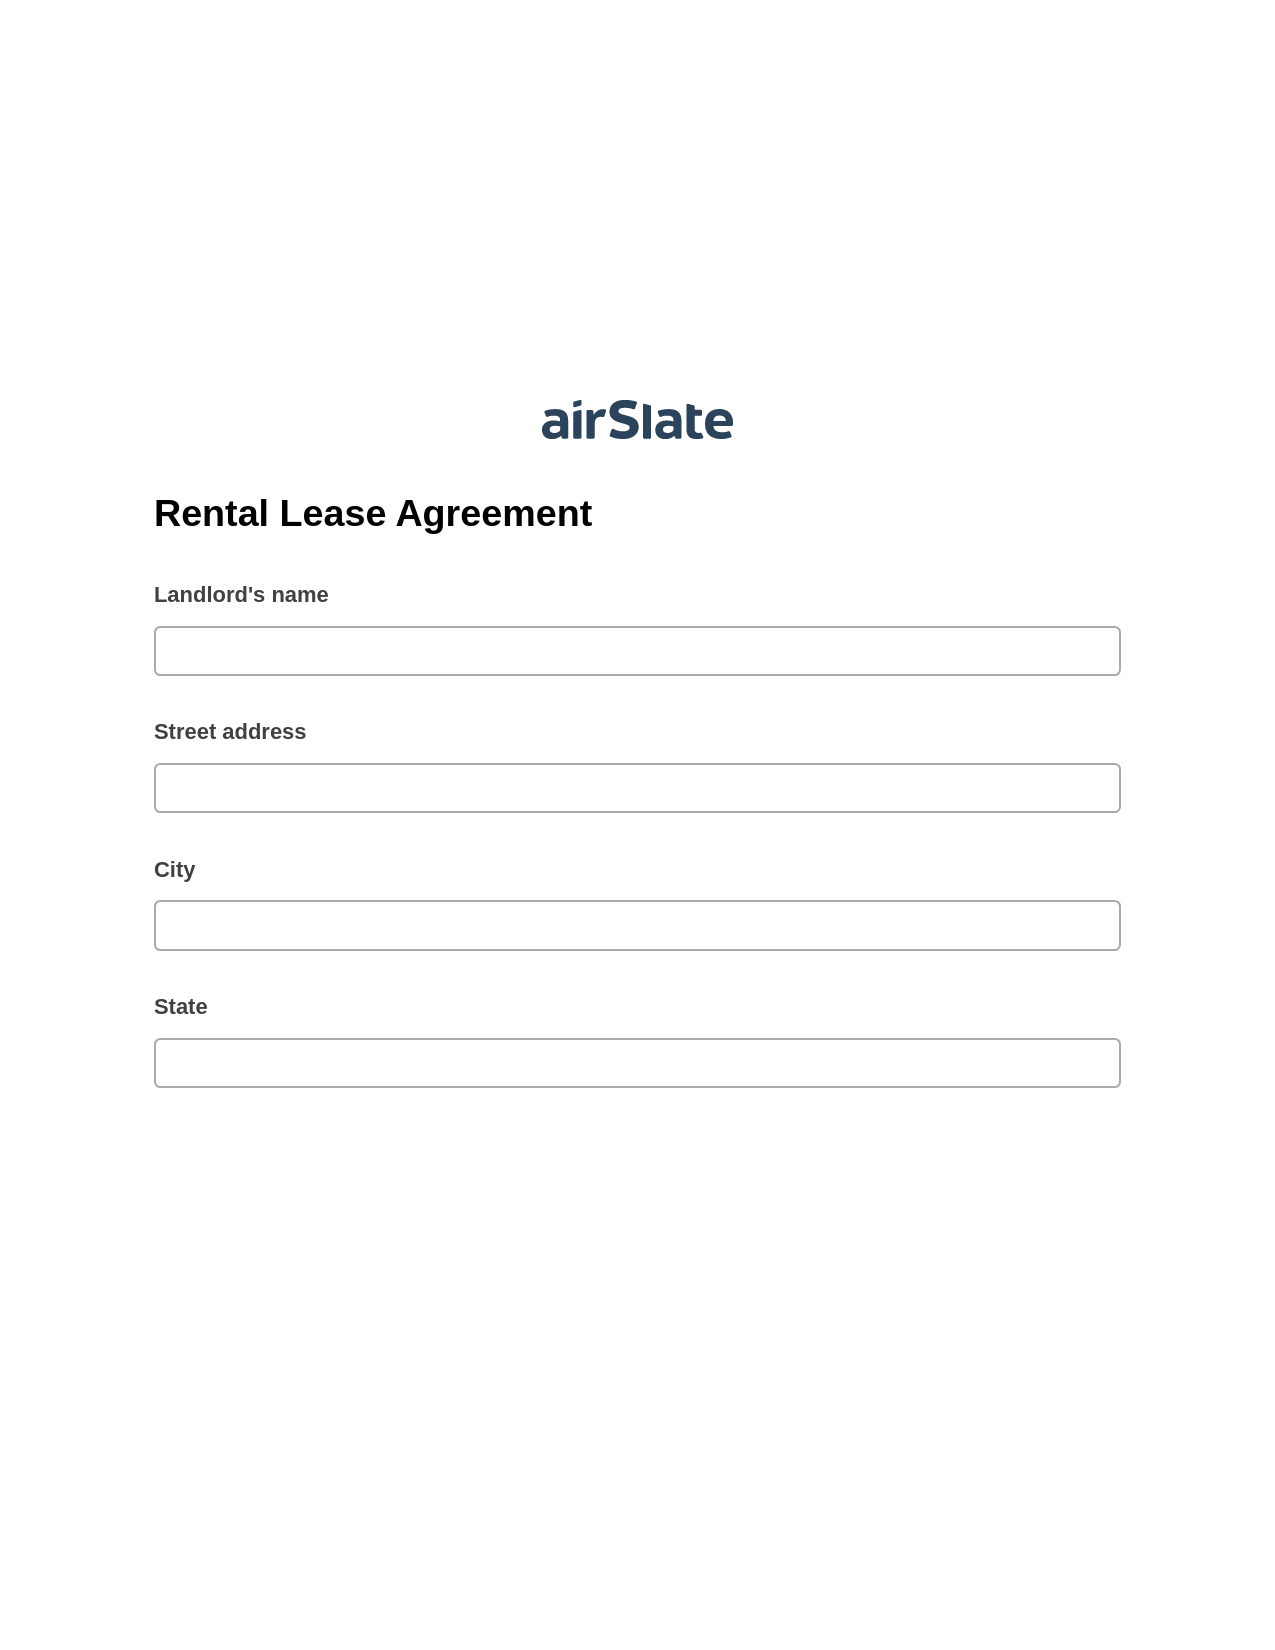 Multirole Rental Lease Agreement Pre-fill from another Slate Bot, Create NetSuite Records Bot, Dropbox Bot